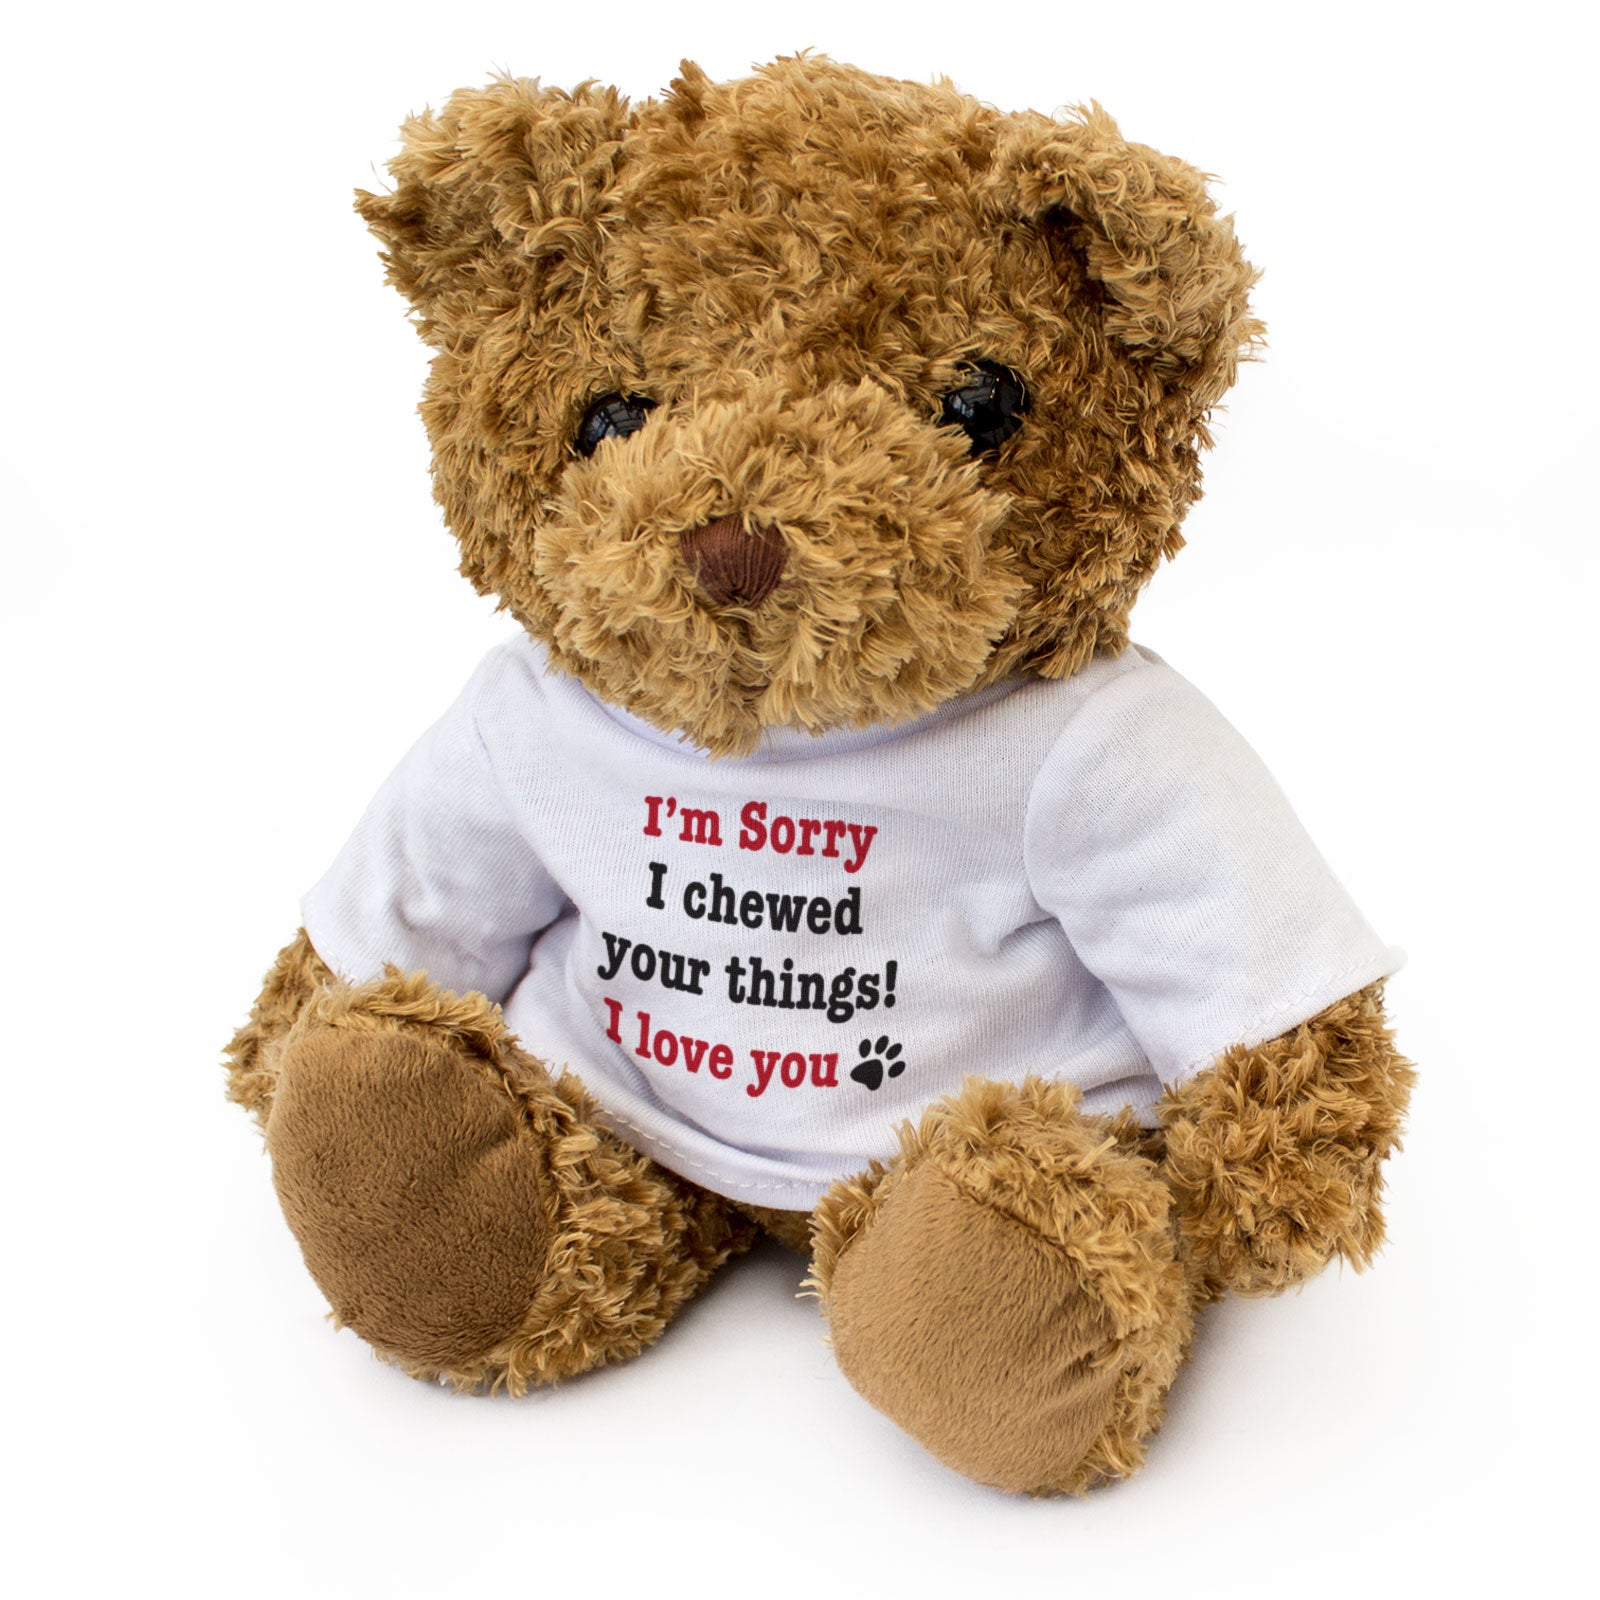 Sorry I Chewed Your Things. I Love You - Teddy Bear